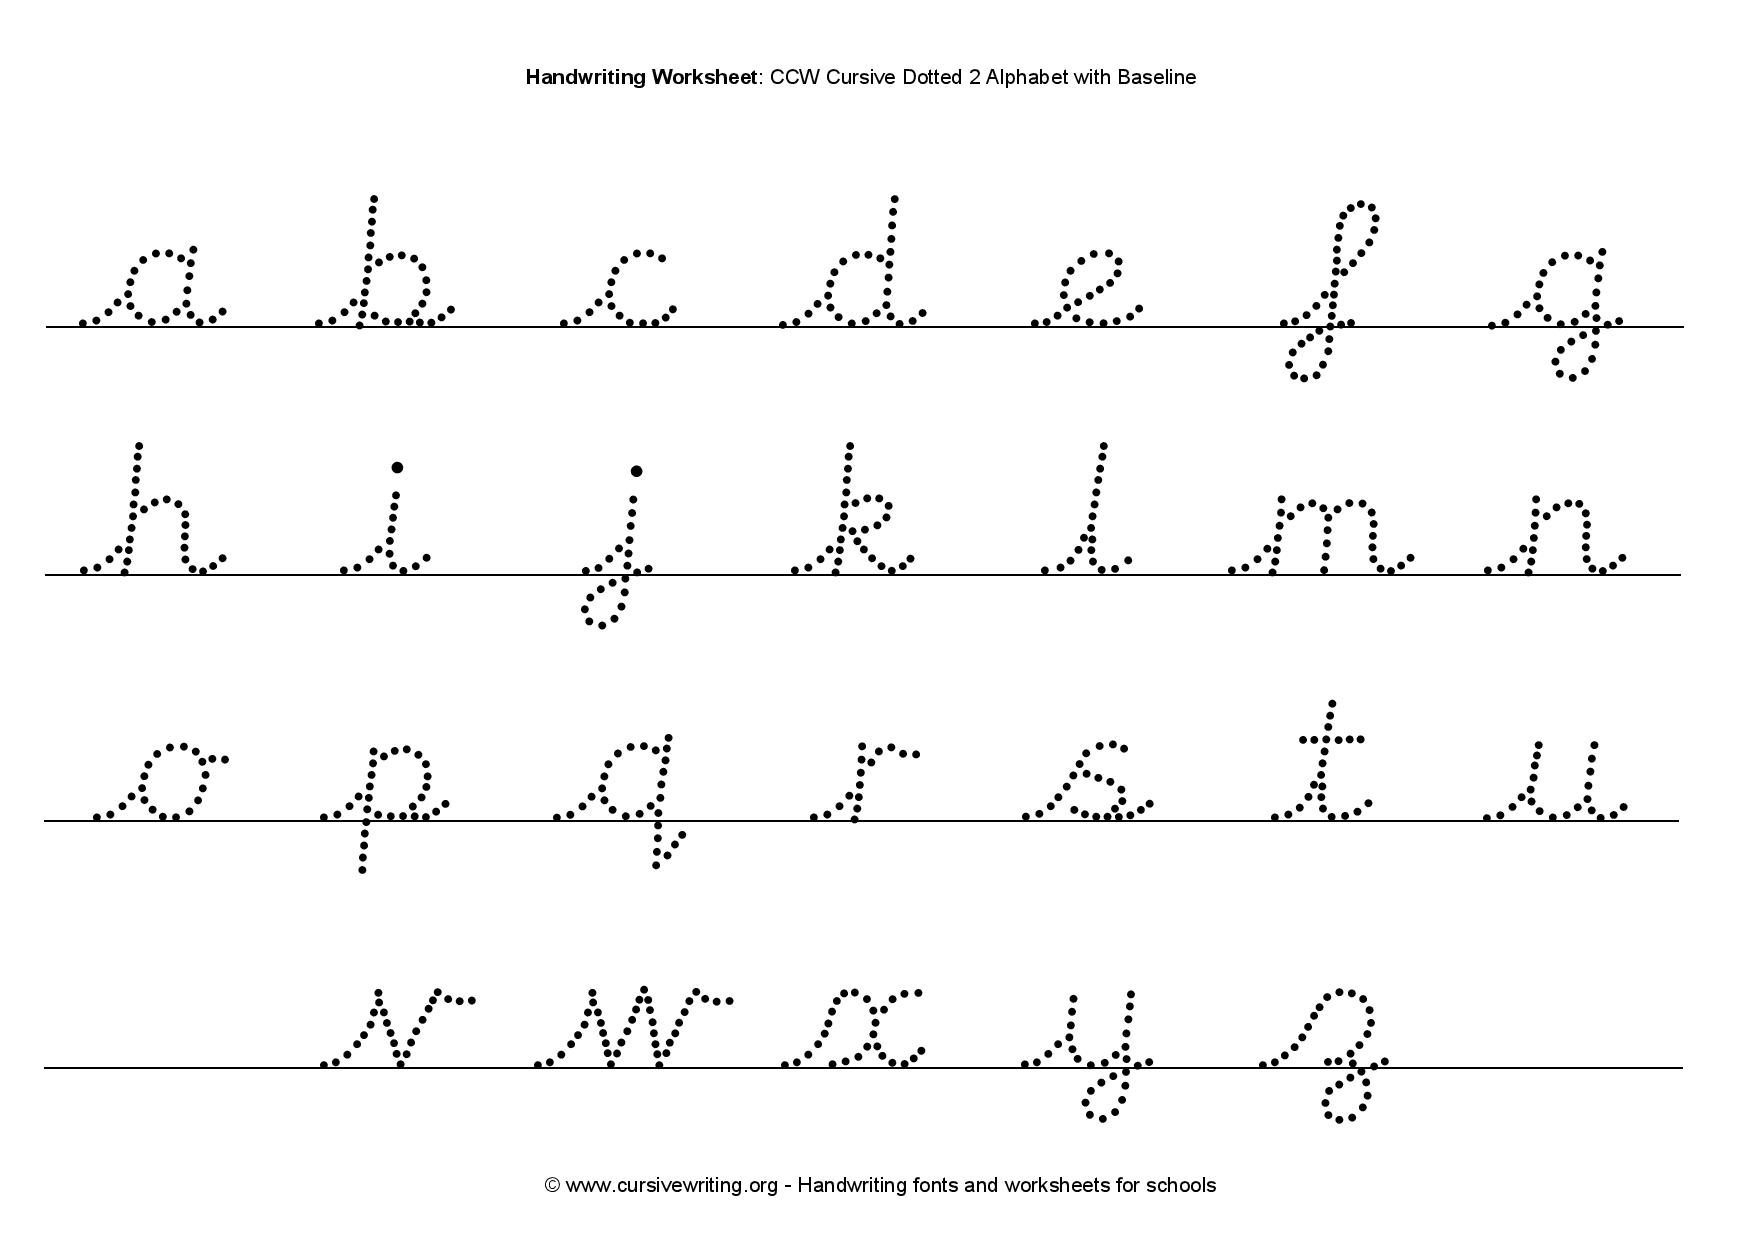 Math Worksheet : Alphabet In Cursiveiting Letters Tracing